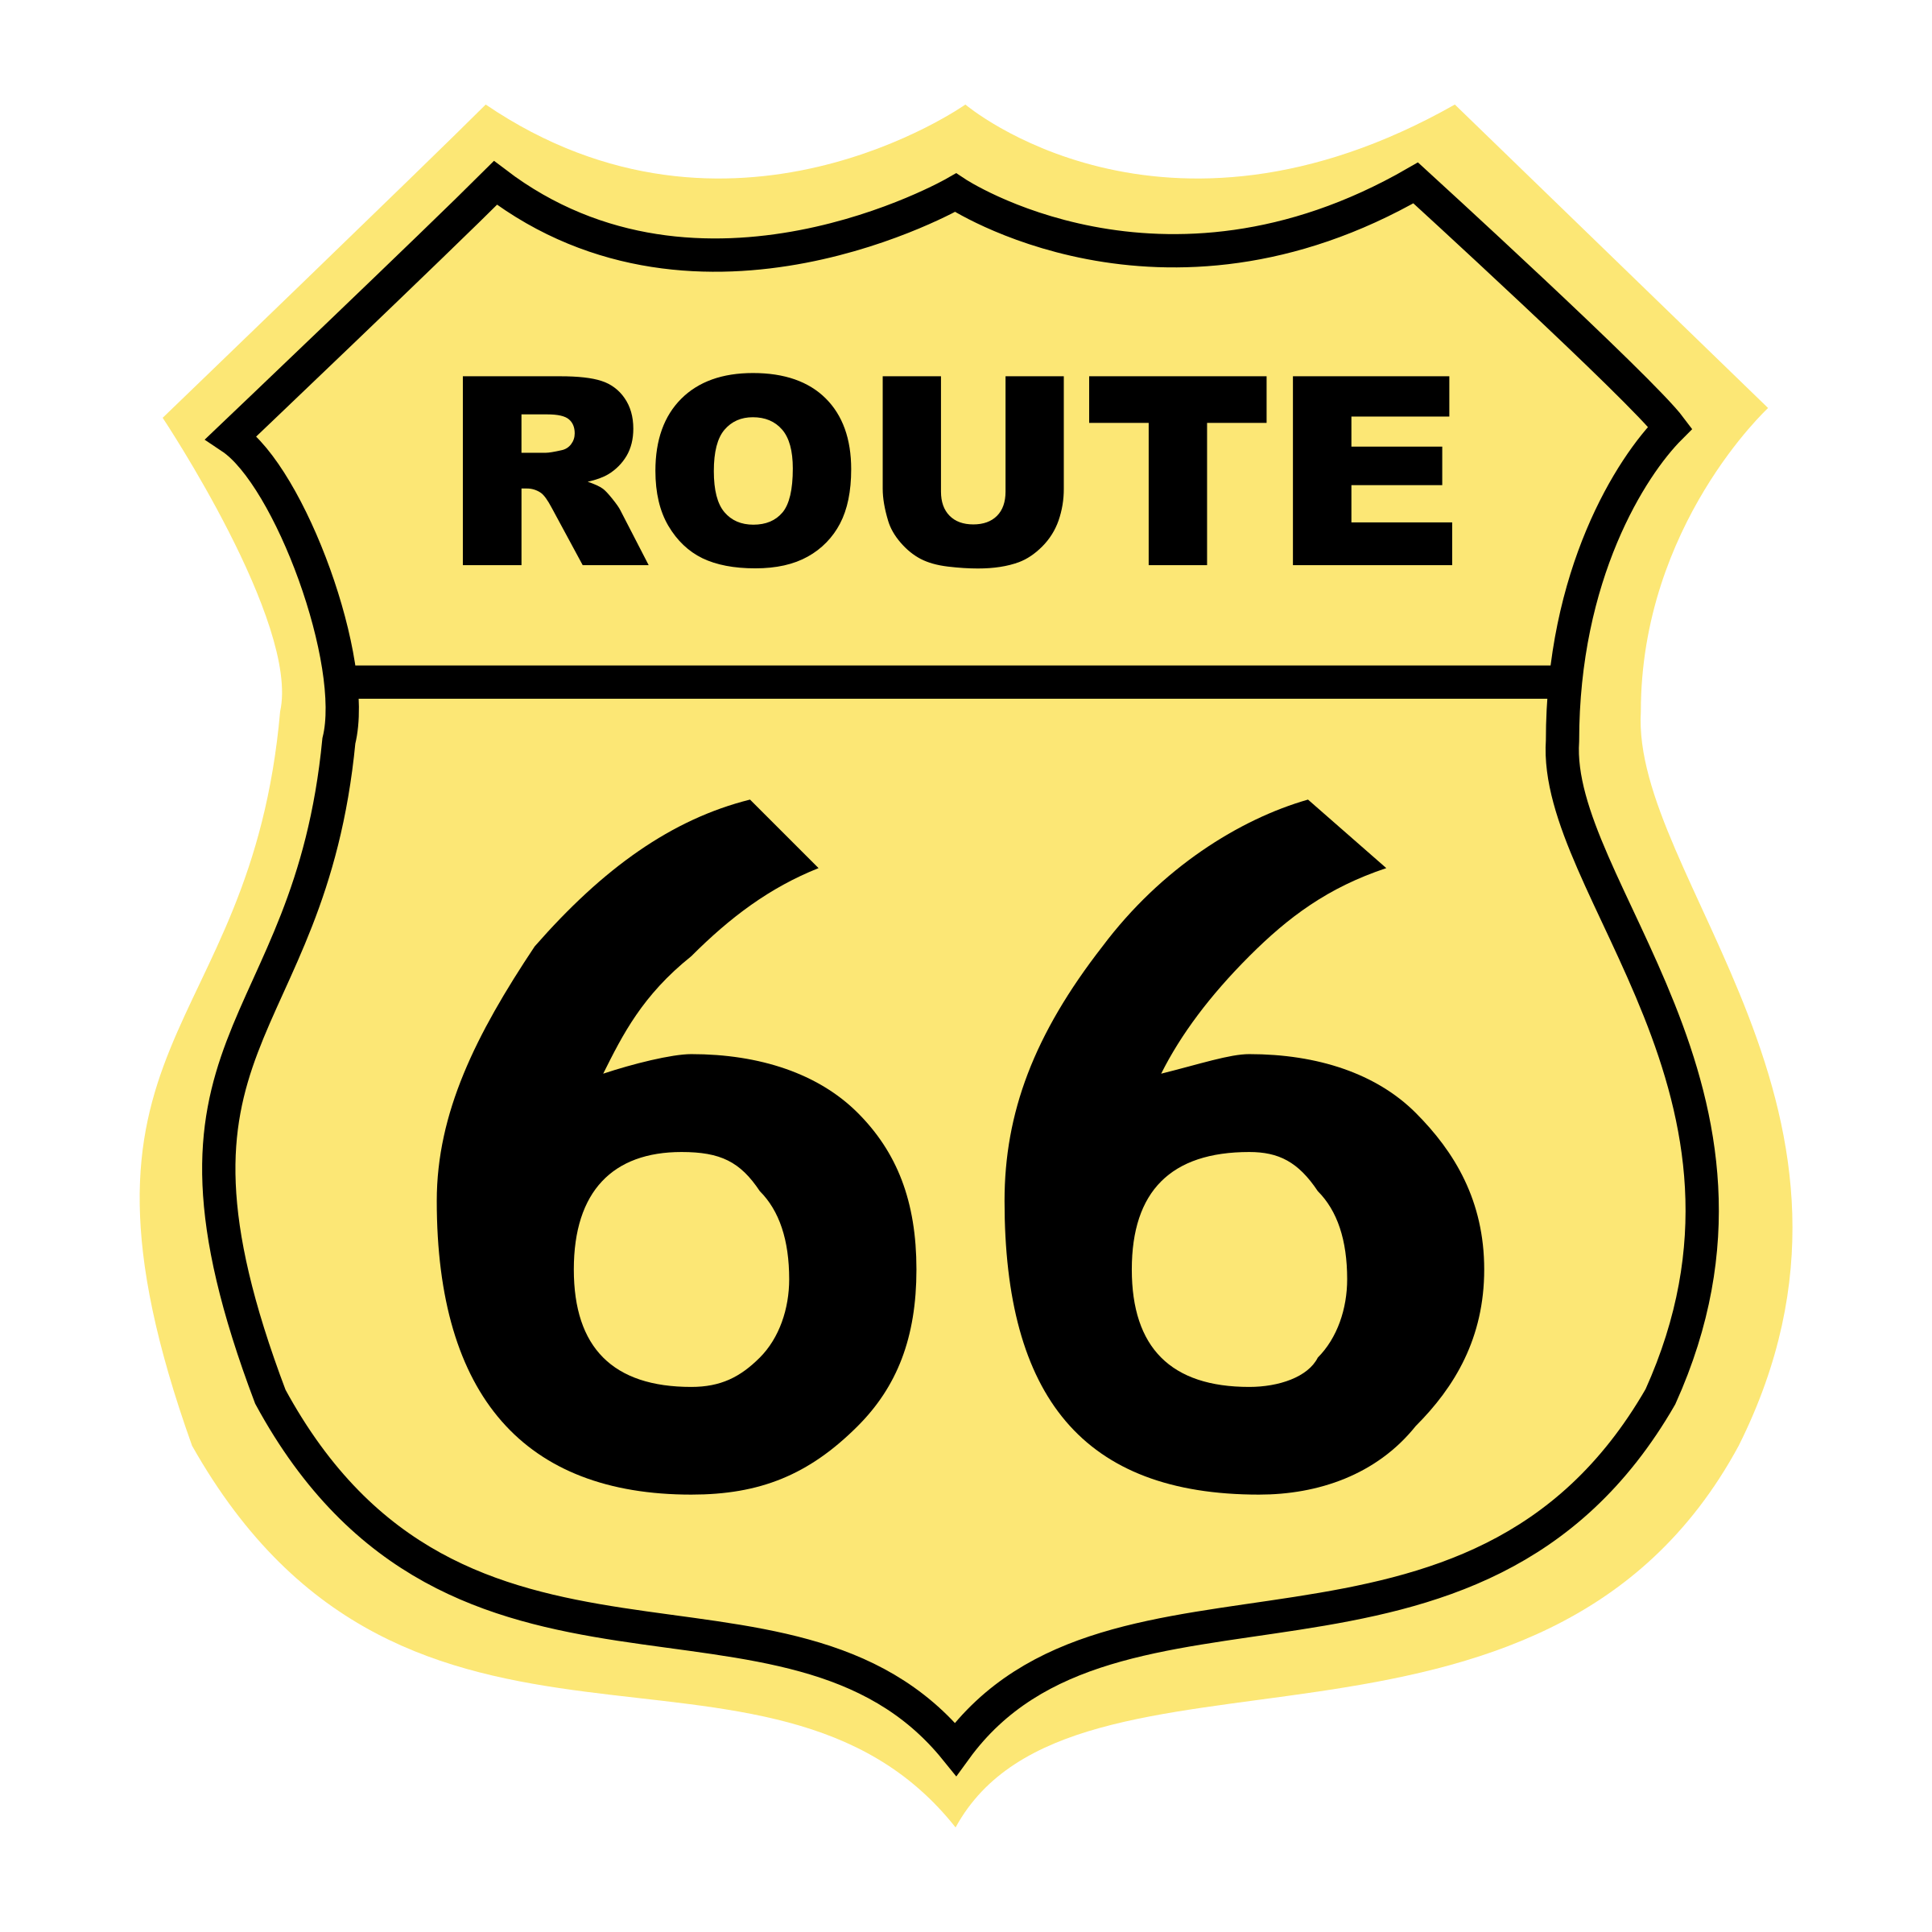 Route 66 Logo PNG Transparent & SVG Vector - Freebie Supply